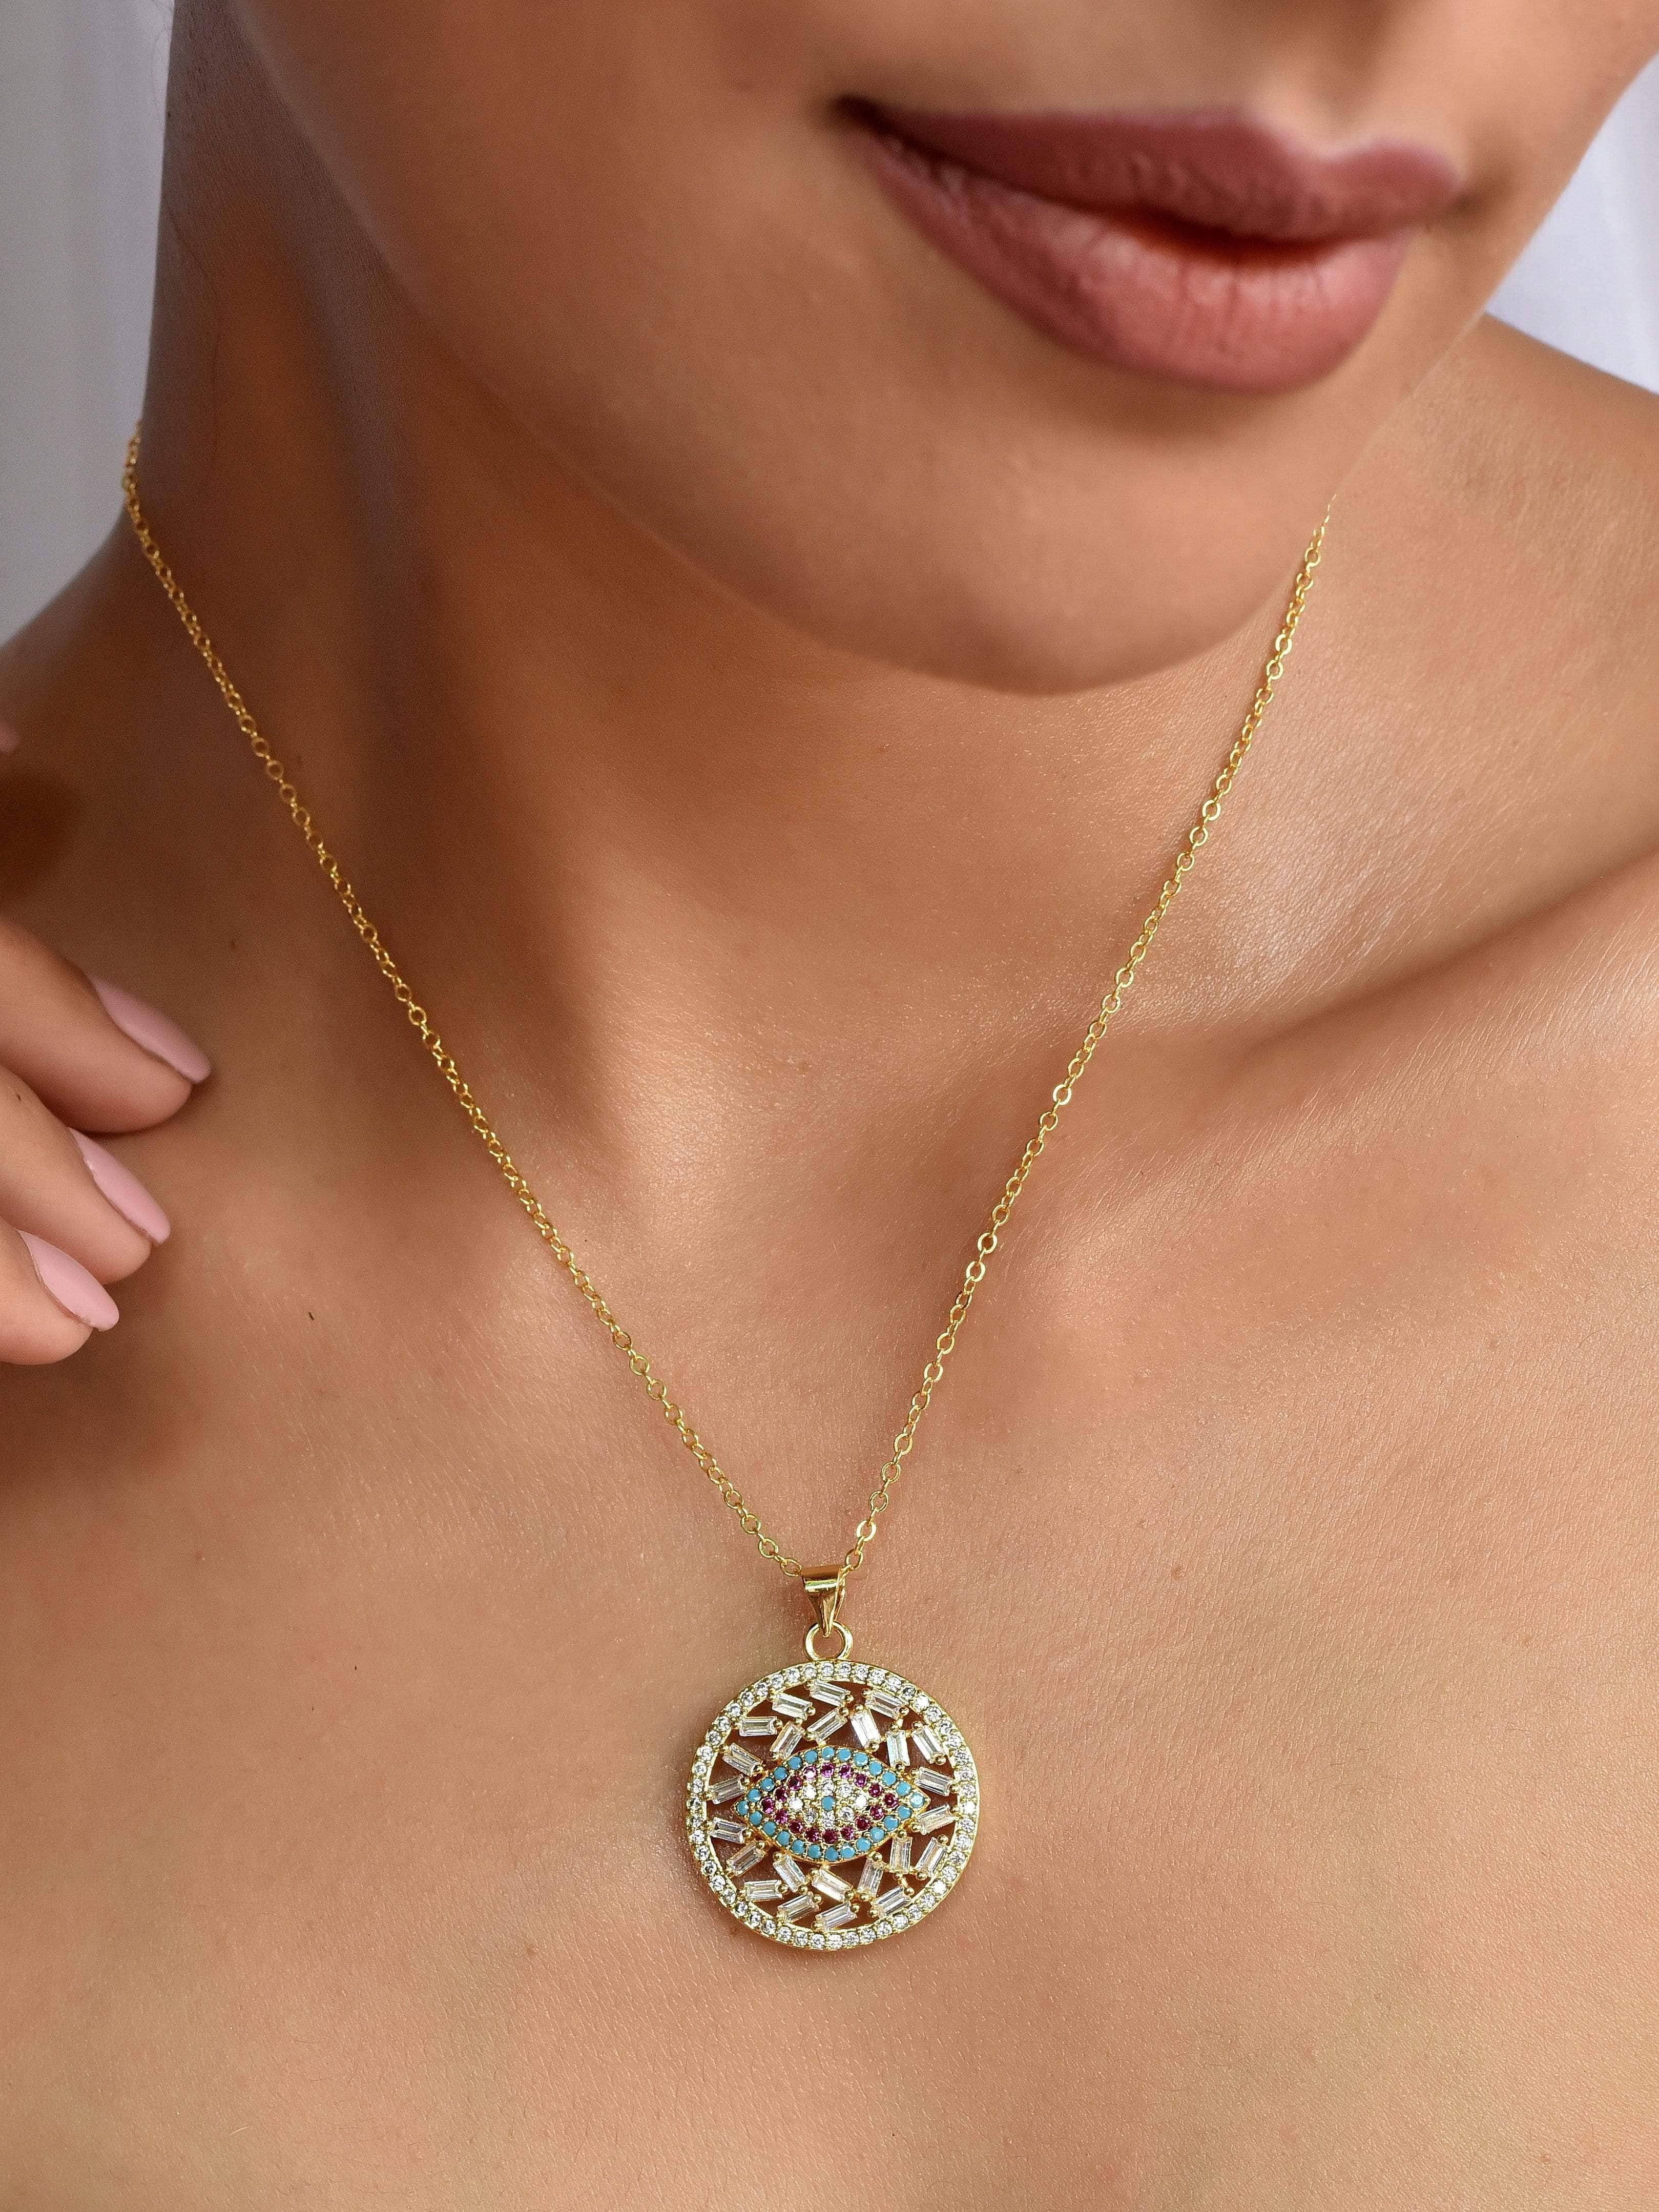 Klissaa necklace Amyra Round Gold Plated Evil Eye Necklace